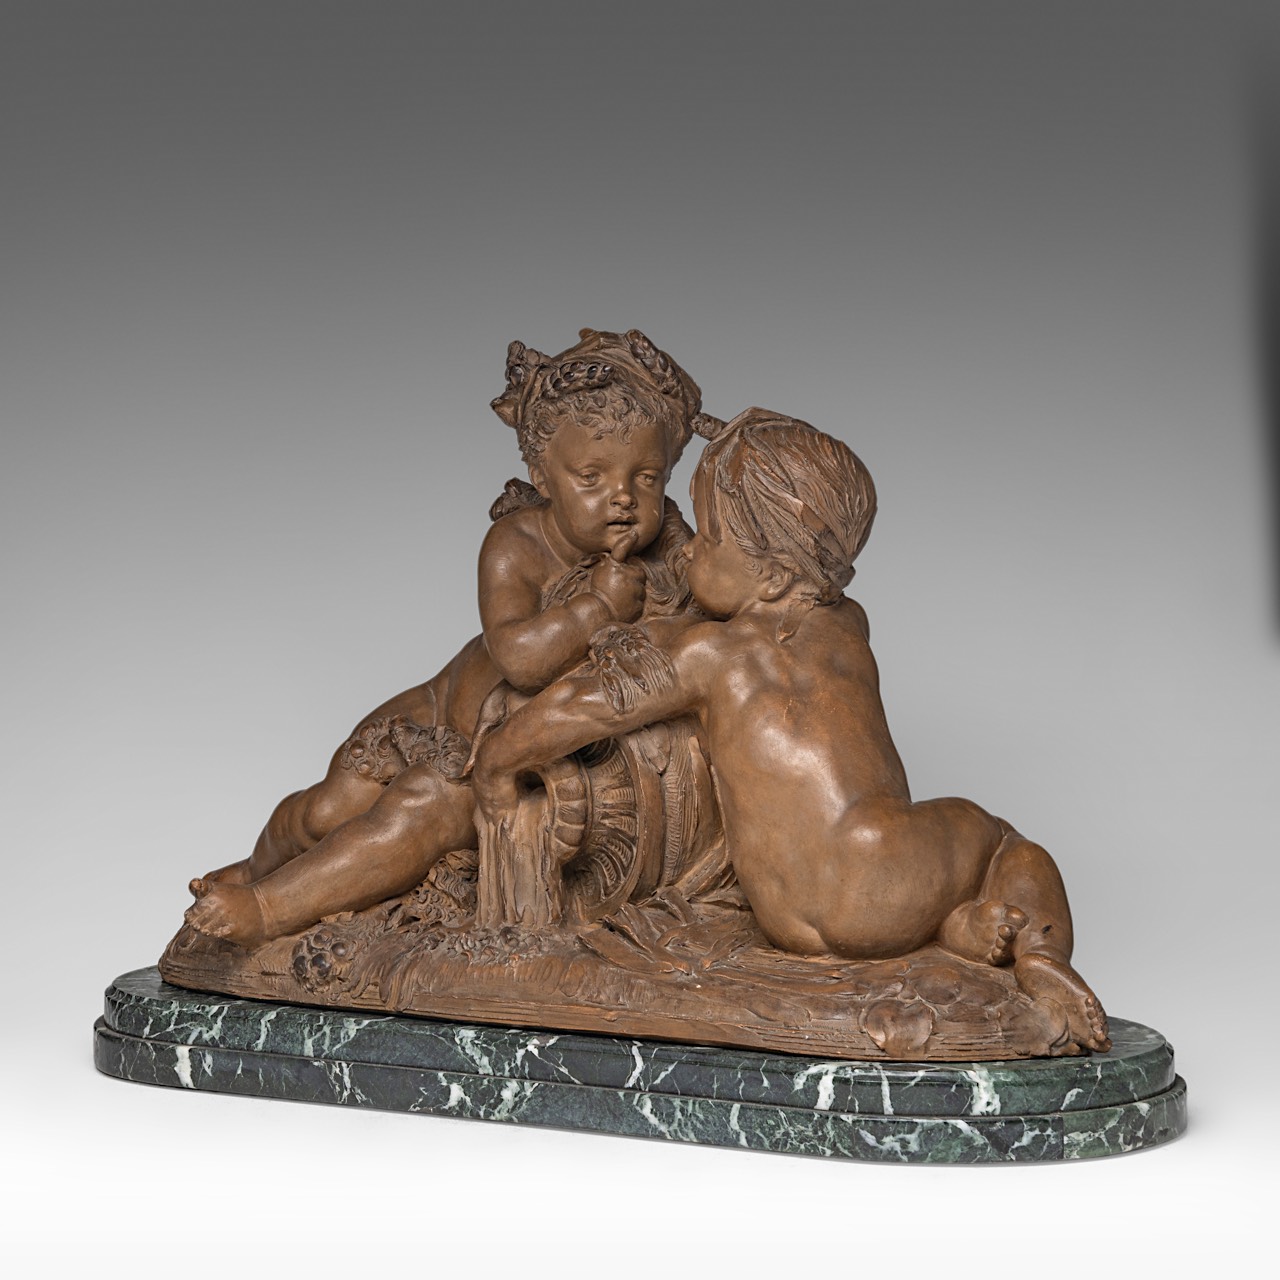 Carrier-Belleuse (1824-1887), two putti by the fountain, terracotta on a marble base, H 43 - W 68 cm - Image 2 of 10